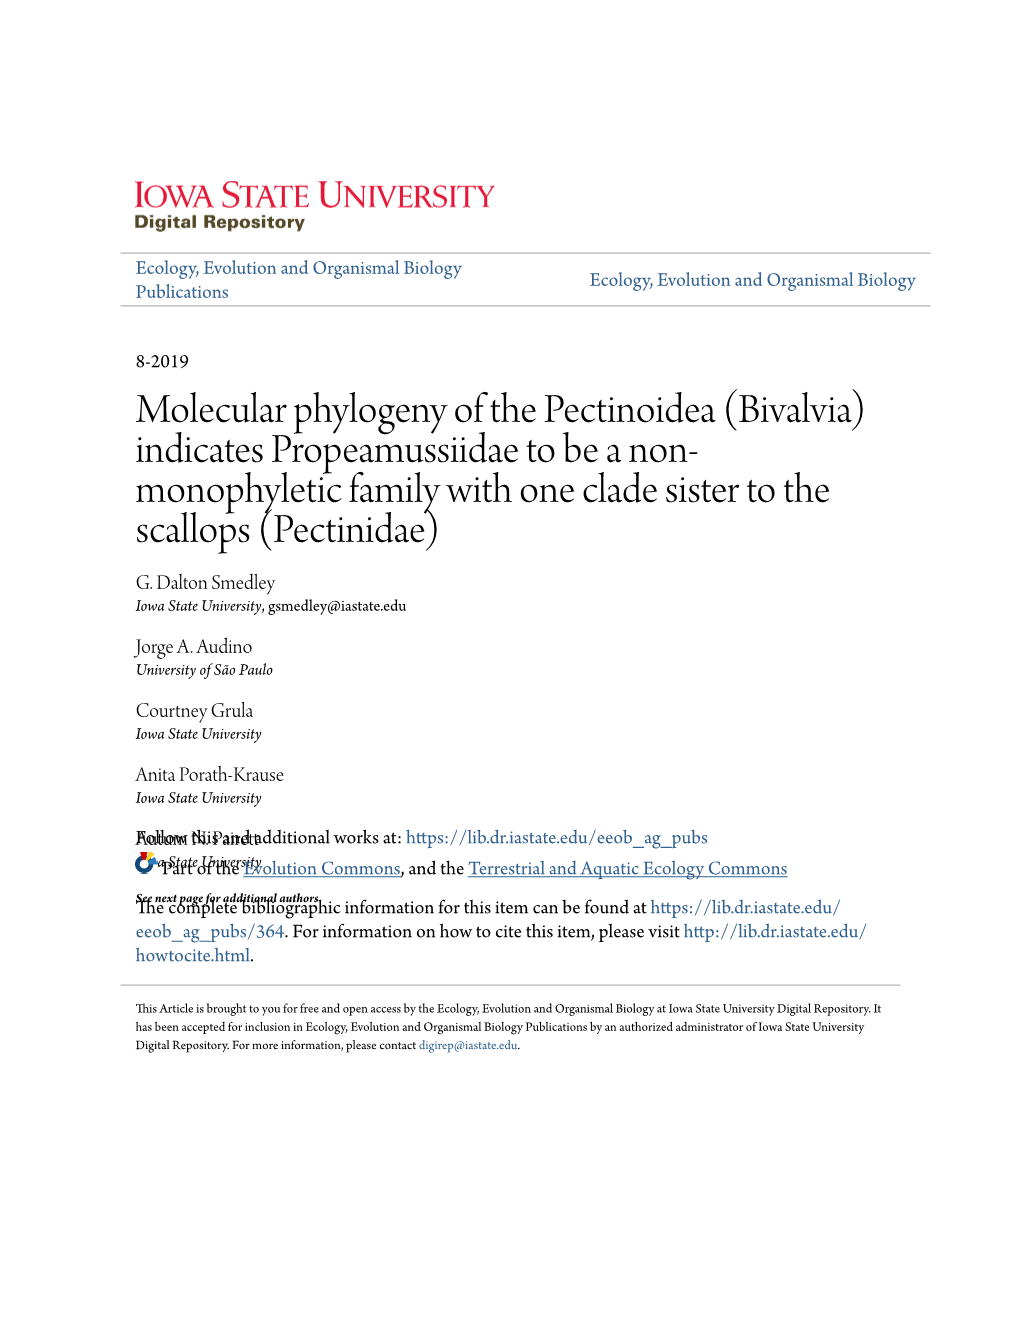 Molecular Phylogeny of the Pectinoidea (Bivalvia) Indicates Propeamussiidae to Be a Non- Monophyletic Family with One Clade Sister to the Scallops (Pectinidae) G